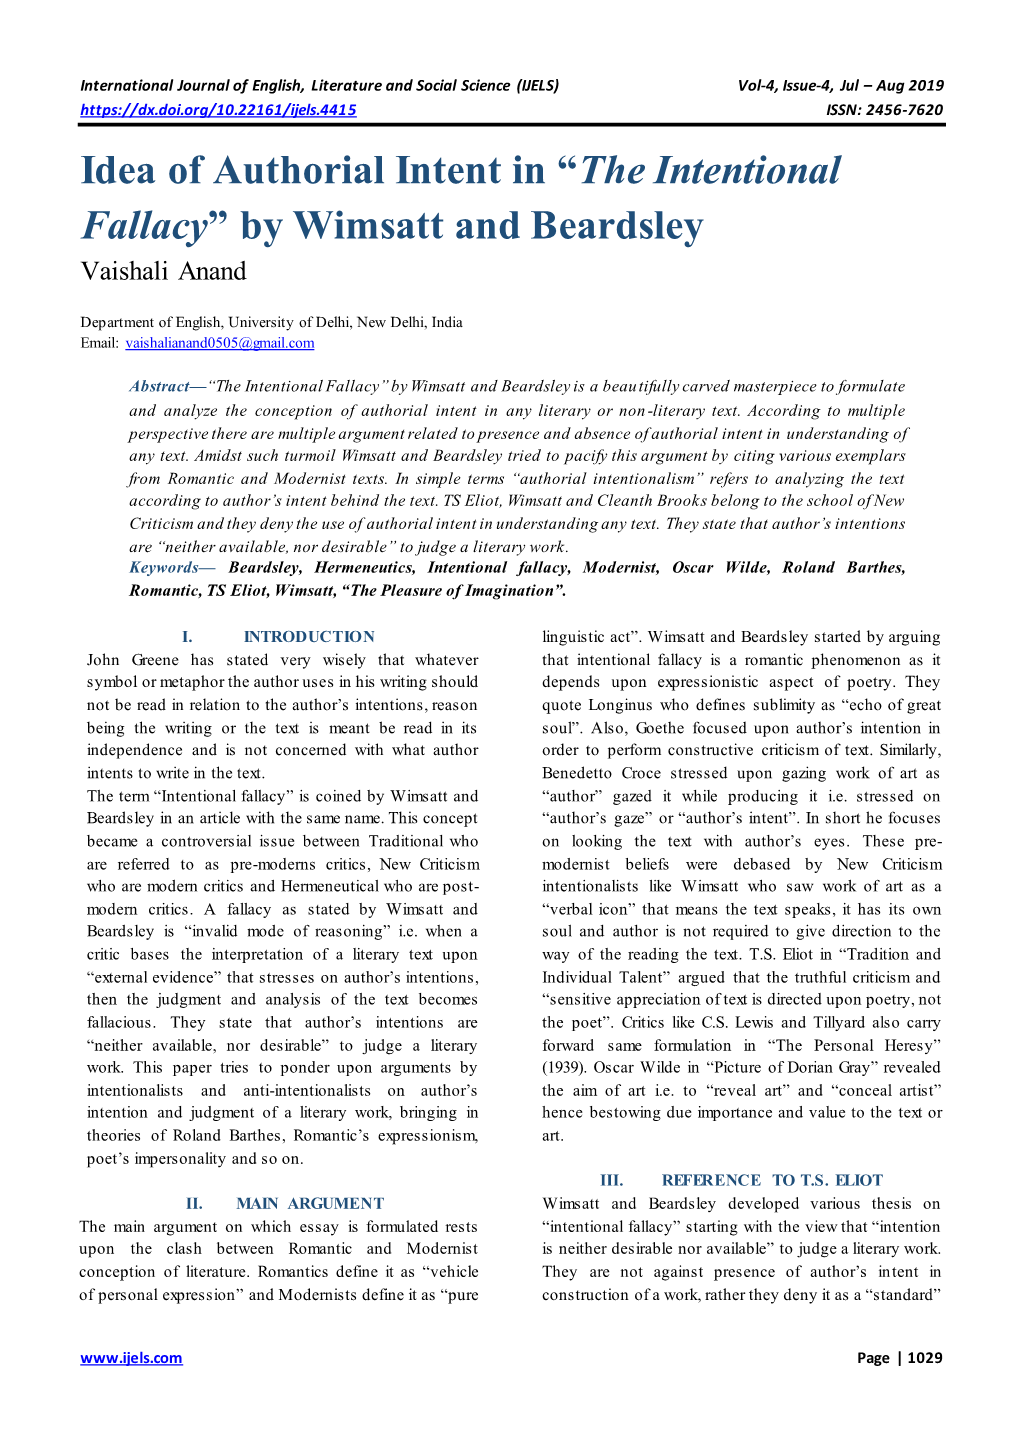 Idea of Authorial Intent in “The Intentional Fallacy” by Wimsatt and Beardsley Vaishali Anand